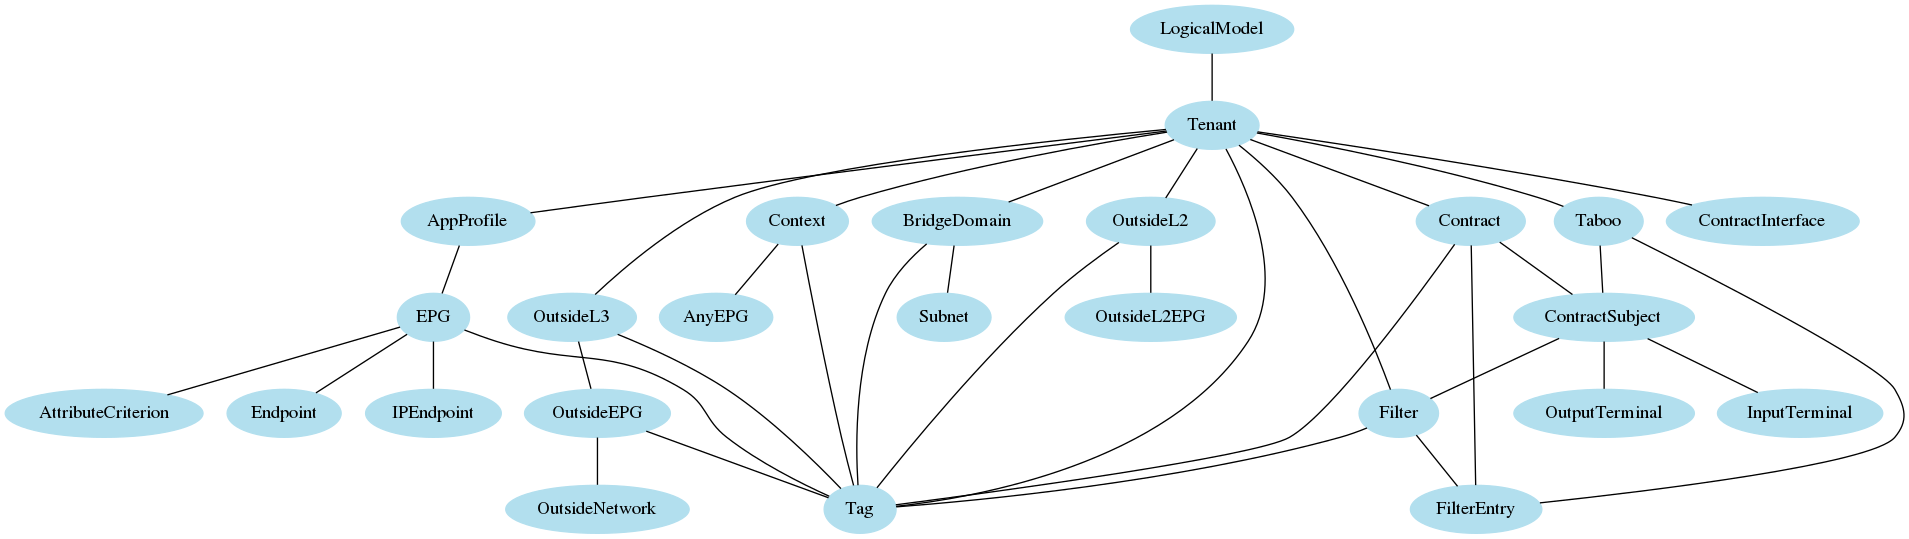 // ACI Toolkit Class Hierarchy
digraph "ACI Toolkit Class Hierarchy" {
    node [color=lightblue2 style=filled]
    edge [arrowhead=none]
    LogicalModel [label=LogicalModel]
    Tenant [label=Tenant]
    ContractSubject [label=ContractSubject]
    OutputTerminal [label=OutputTerminal]
    EPG [label=EPG]
    IPEndpoint [label=IPEndpoint]
    Filter [label=Filter]
    AppProfile [label=AppProfile]
    OutsideL3 [label=OutsideL3]
    Tag [label=Tag]
    AttributeCriterion [label=AttributeCriterion]
    Taboo [label=Taboo]
    Endpoint [label=Endpoint]
    OutsideEPG [label=OutsideEPG]
    Contract [label=Contract]
    FilterEntry [label=FilterEntry]
    BridgeDomain [label=BridgeDomain]
    Subnet [label=Subnet]
    OutsideL2 [label=OutsideL2]
    OutsideL2EPG [label=OutsideL2EPG]
    ContractInterface [label=ContractInterface]
    Context [label=Context]
    OutsideNetwork [label=OutsideNetwork]
    InputTerminal [label=InputTerminal]
    AnyEPG [label=AnyEPG]
    LogicalModel -> Tenant
    ContractSubject -> OutputTerminal
    EPG -> IPEndpoint
    ContractSubject -> Filter
    AppProfile -> EPG
    OutsideL3 -> Tag
    EPG -> AttributeCriterion
    Taboo -> ContractSubject
    EPG -> Endpoint
    OutsideEPG -> Tag
    Contract -> FilterEntry
    BridgeDomain -> Subnet
    OutsideL2 -> OutsideL2EPG
    Tenant -> ContractInterface
    Contract -> ContractSubject
    Context -> Tag
    OutsideEPG -> OutsideNetwork
    BridgeDomain -> Tag
    Tenant -> Filter
    Tenant -> Tag
    Filter -> Tag
    Tenant -> Taboo
    ContractSubject -> InputTerminal
    OutsideL3 -> OutsideEPG
    EPG -> Tag
    Taboo -> FilterEntry
    Context -> AnyEPG
    OutsideL2 -> Tag
    Tenant -> AppProfile
    Tenant -> OutsideL3
    Filter -> FilterEntry
    Tenant -> Contract
    Tenant -> OutsideL2
    Tenant -> Context
    Contract -> Tag
    Tenant -> BridgeDomain
}